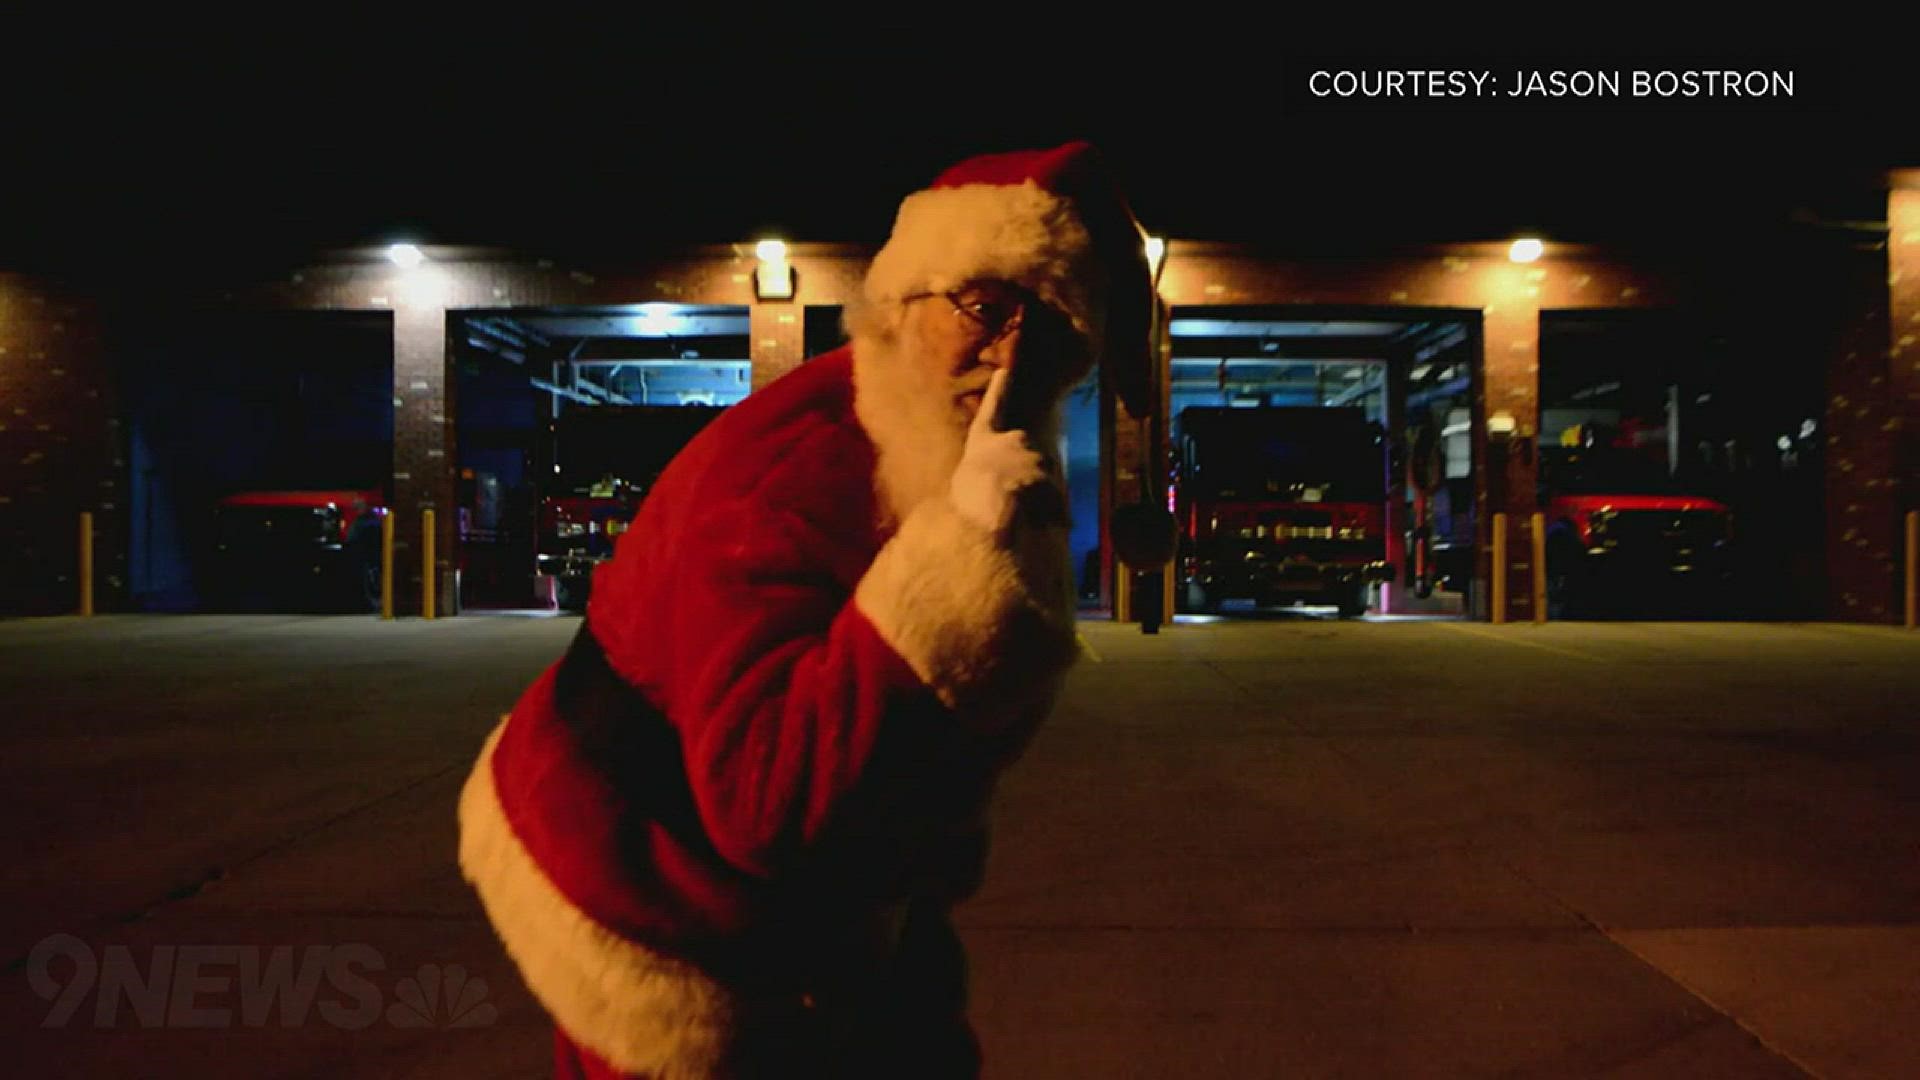 Forget music-themed houses, The Sterling, Colorado Fire Department got into the holiday spirit by syncing the the lights on five fire trucks to Christmas music. (Video: Jason Bostron)